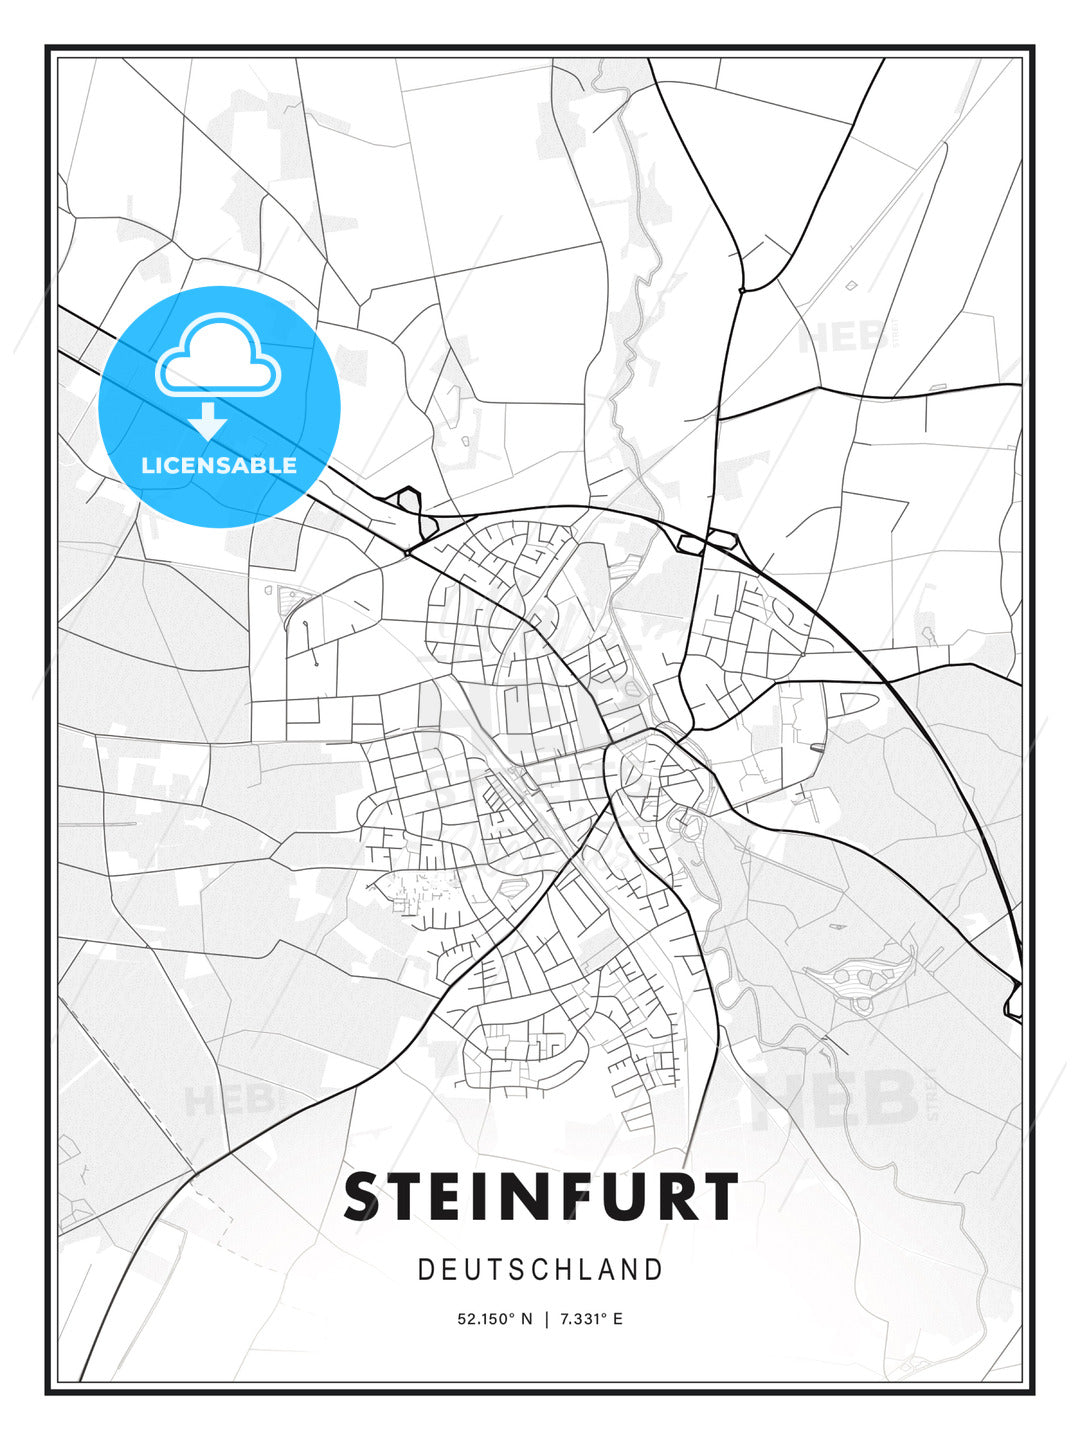 Steinfurt, Germany, Modern Print Template in Various Formats - HEBSTREITS Sketches